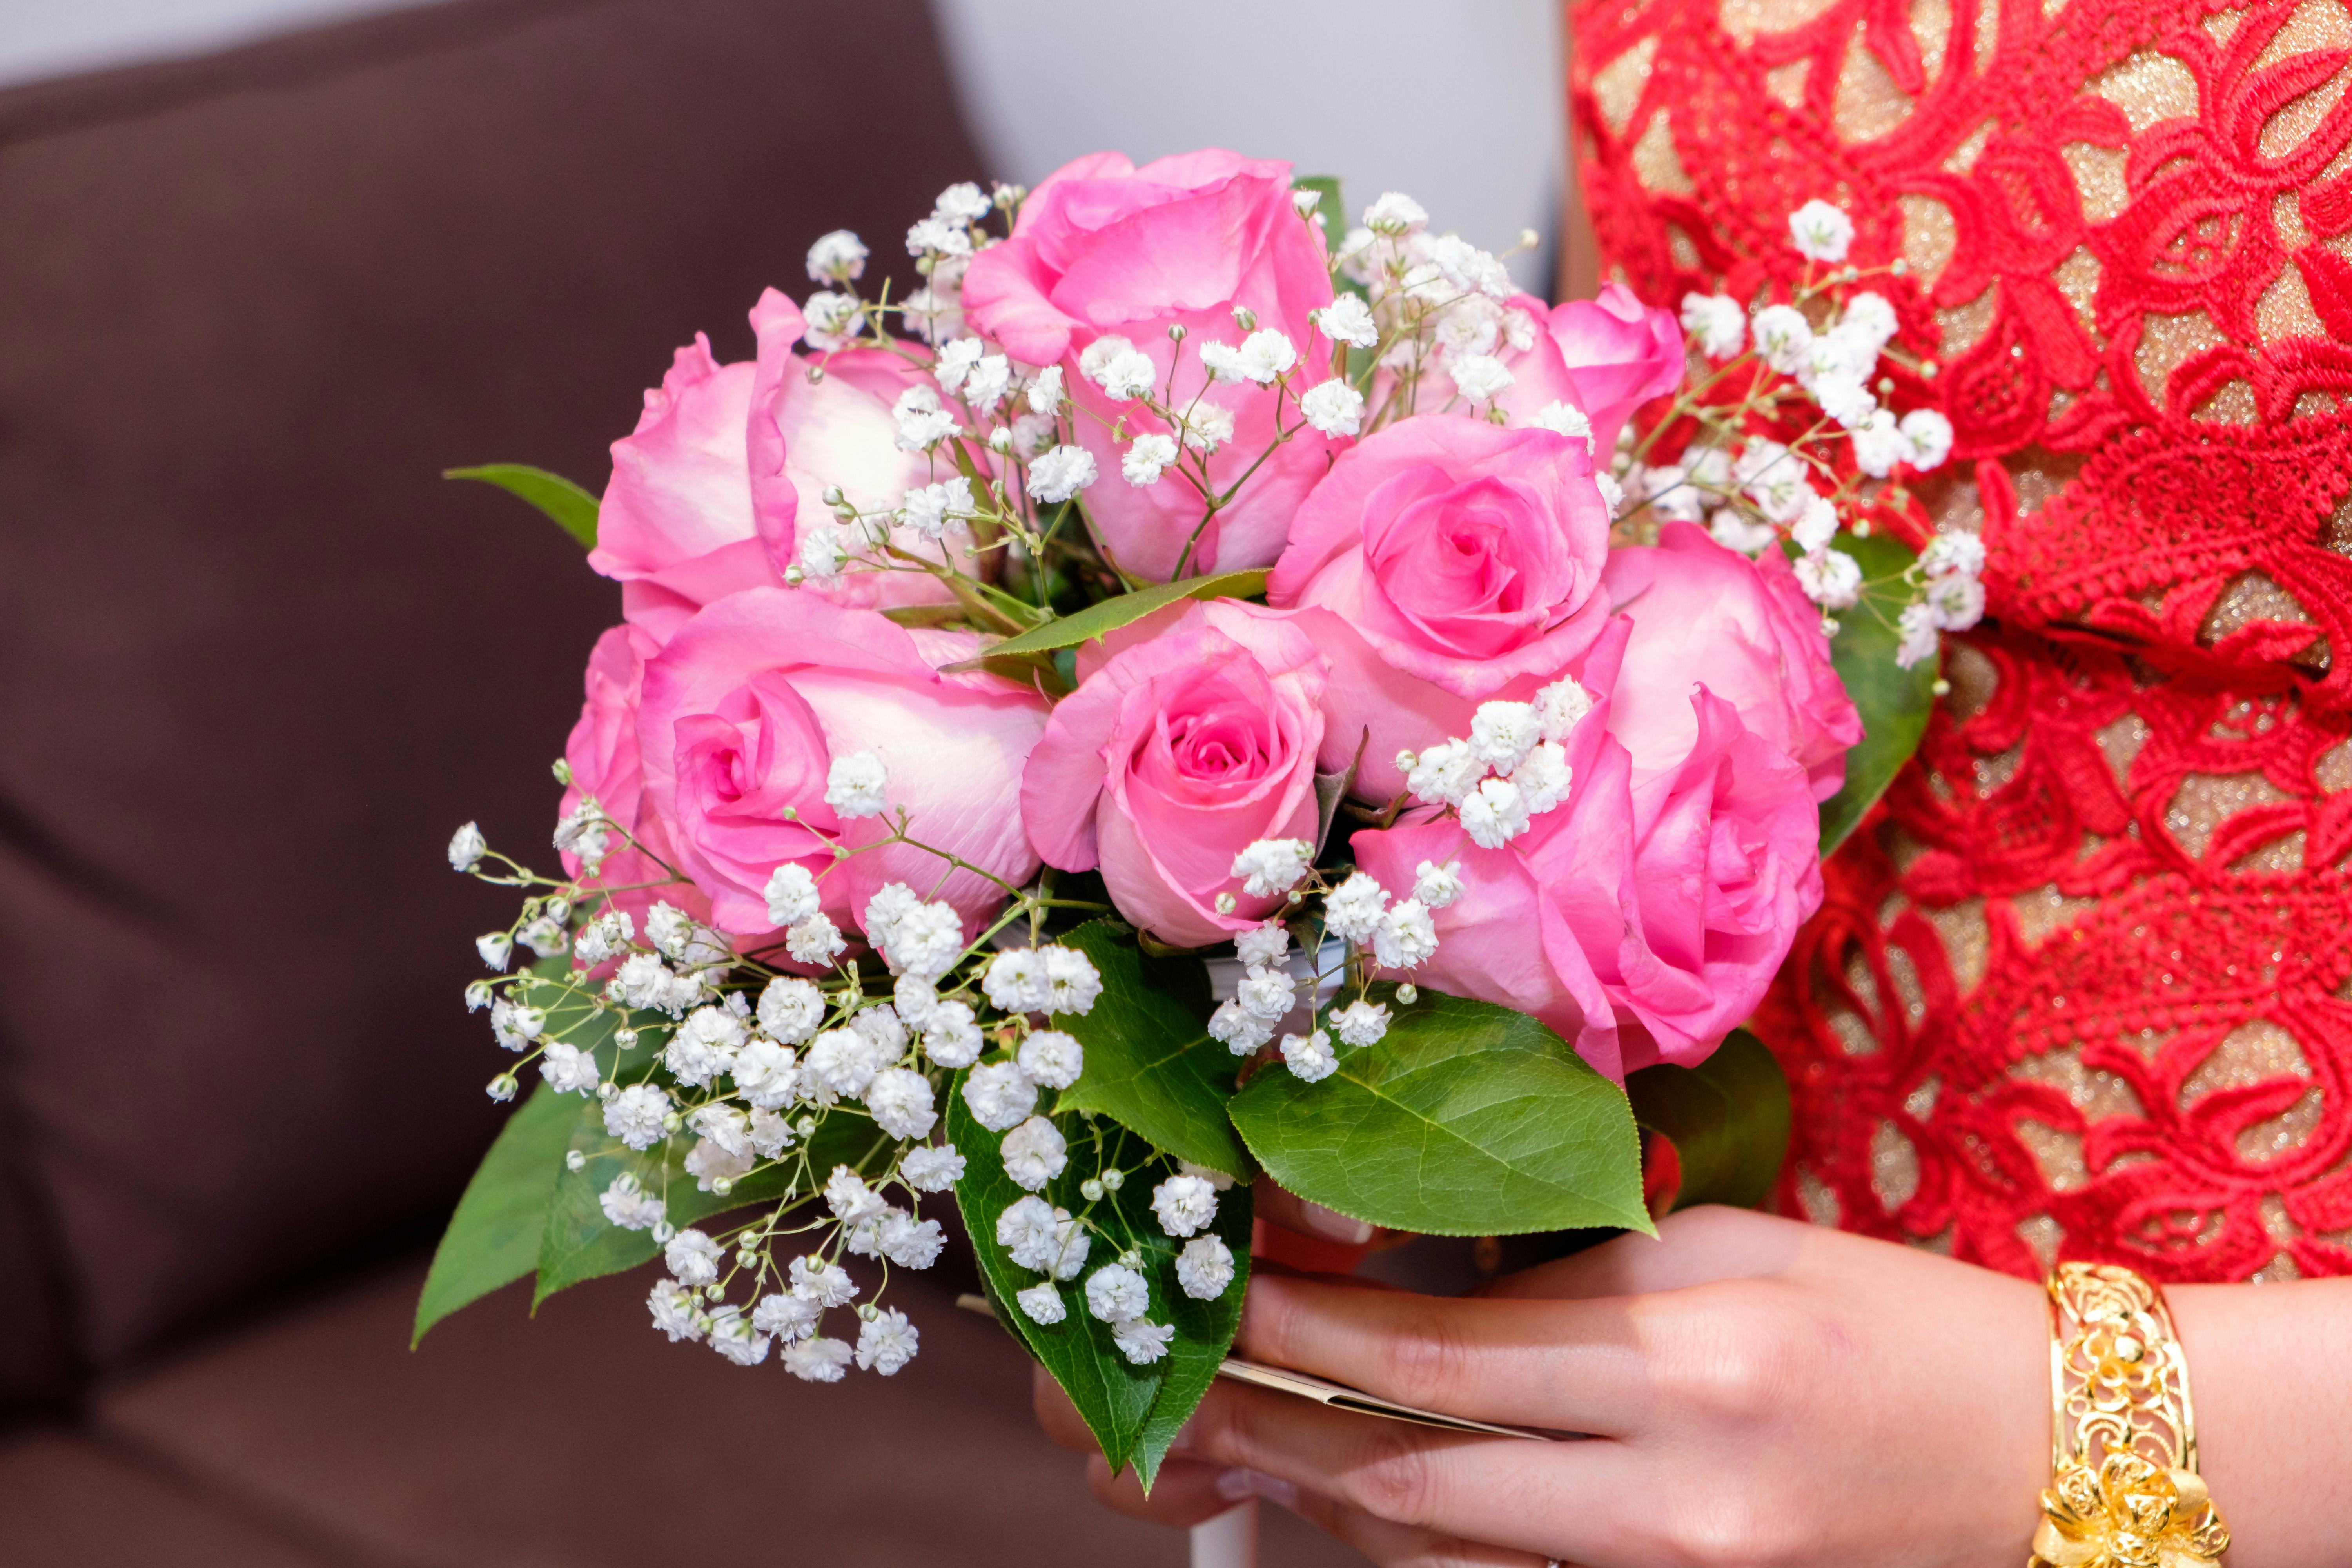 hands holding a bouquet of pink roses